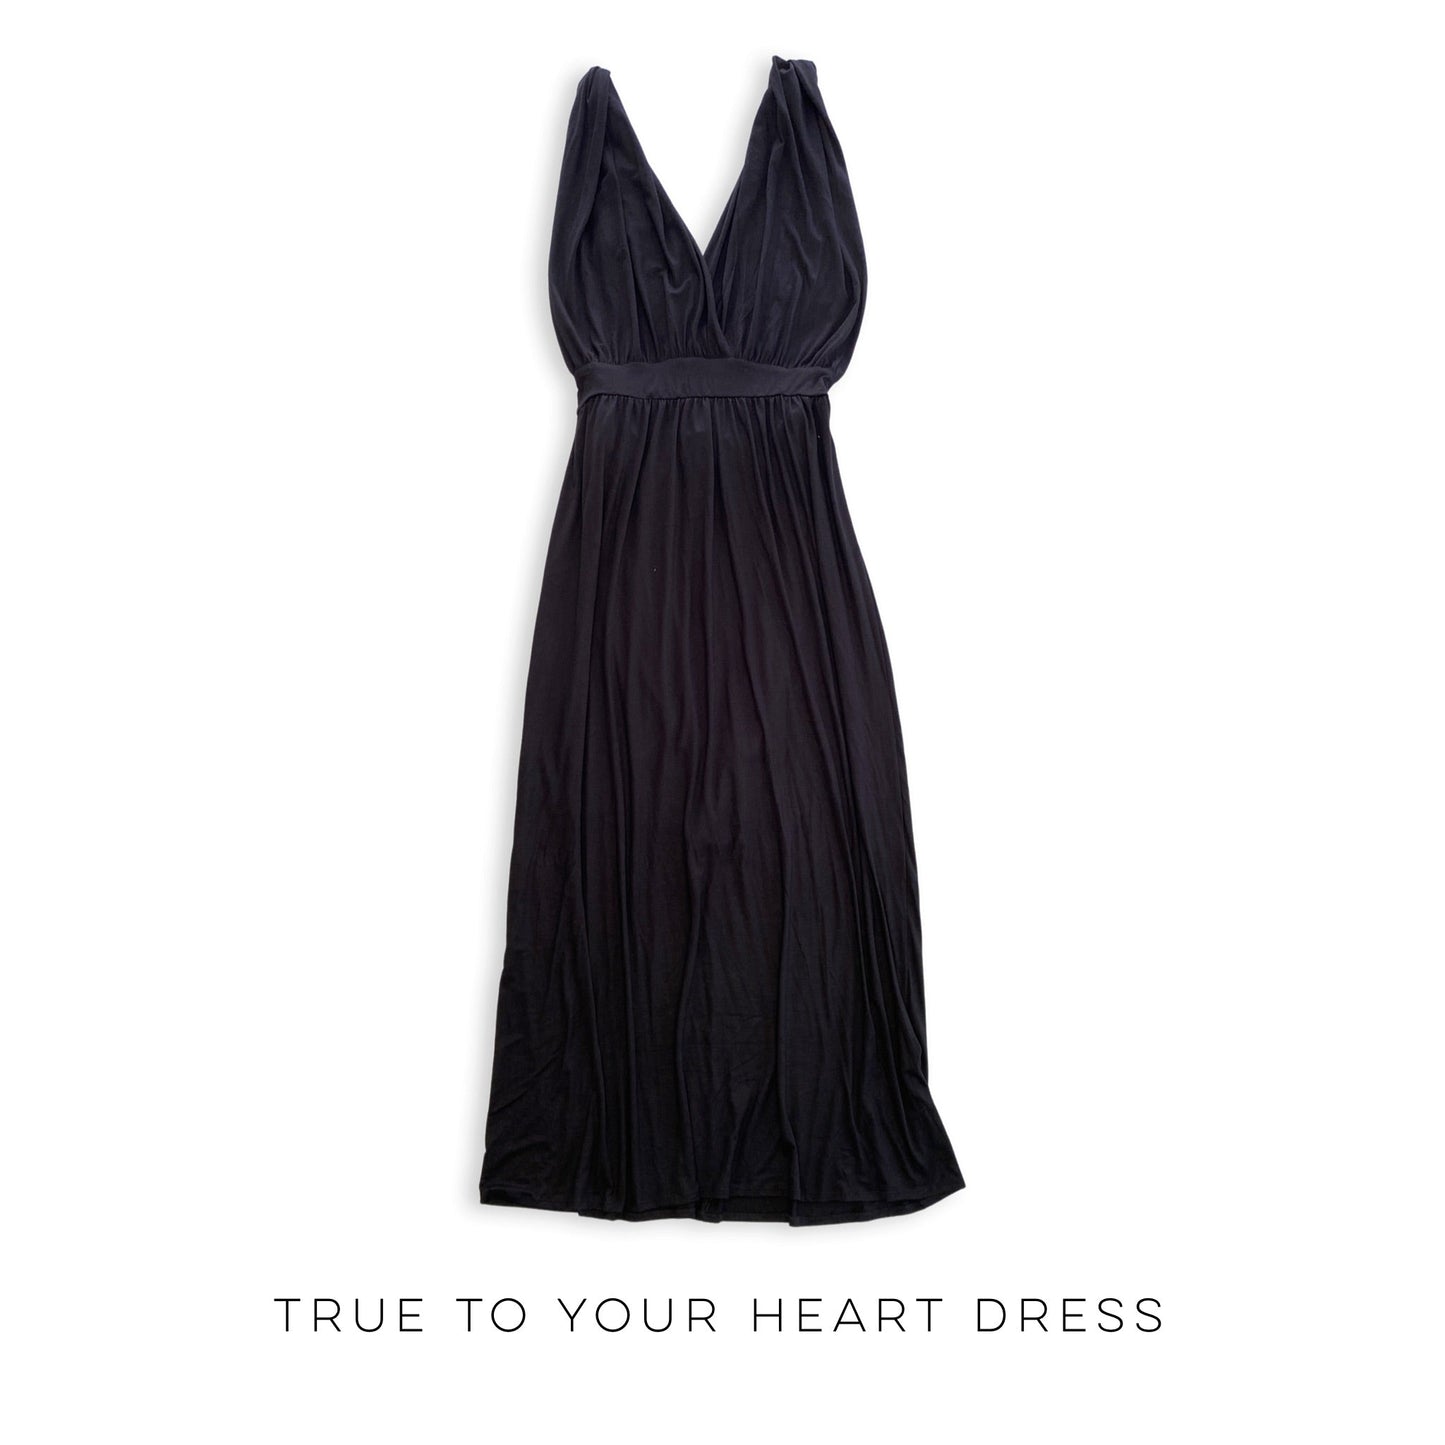 True to Your Heart Dress